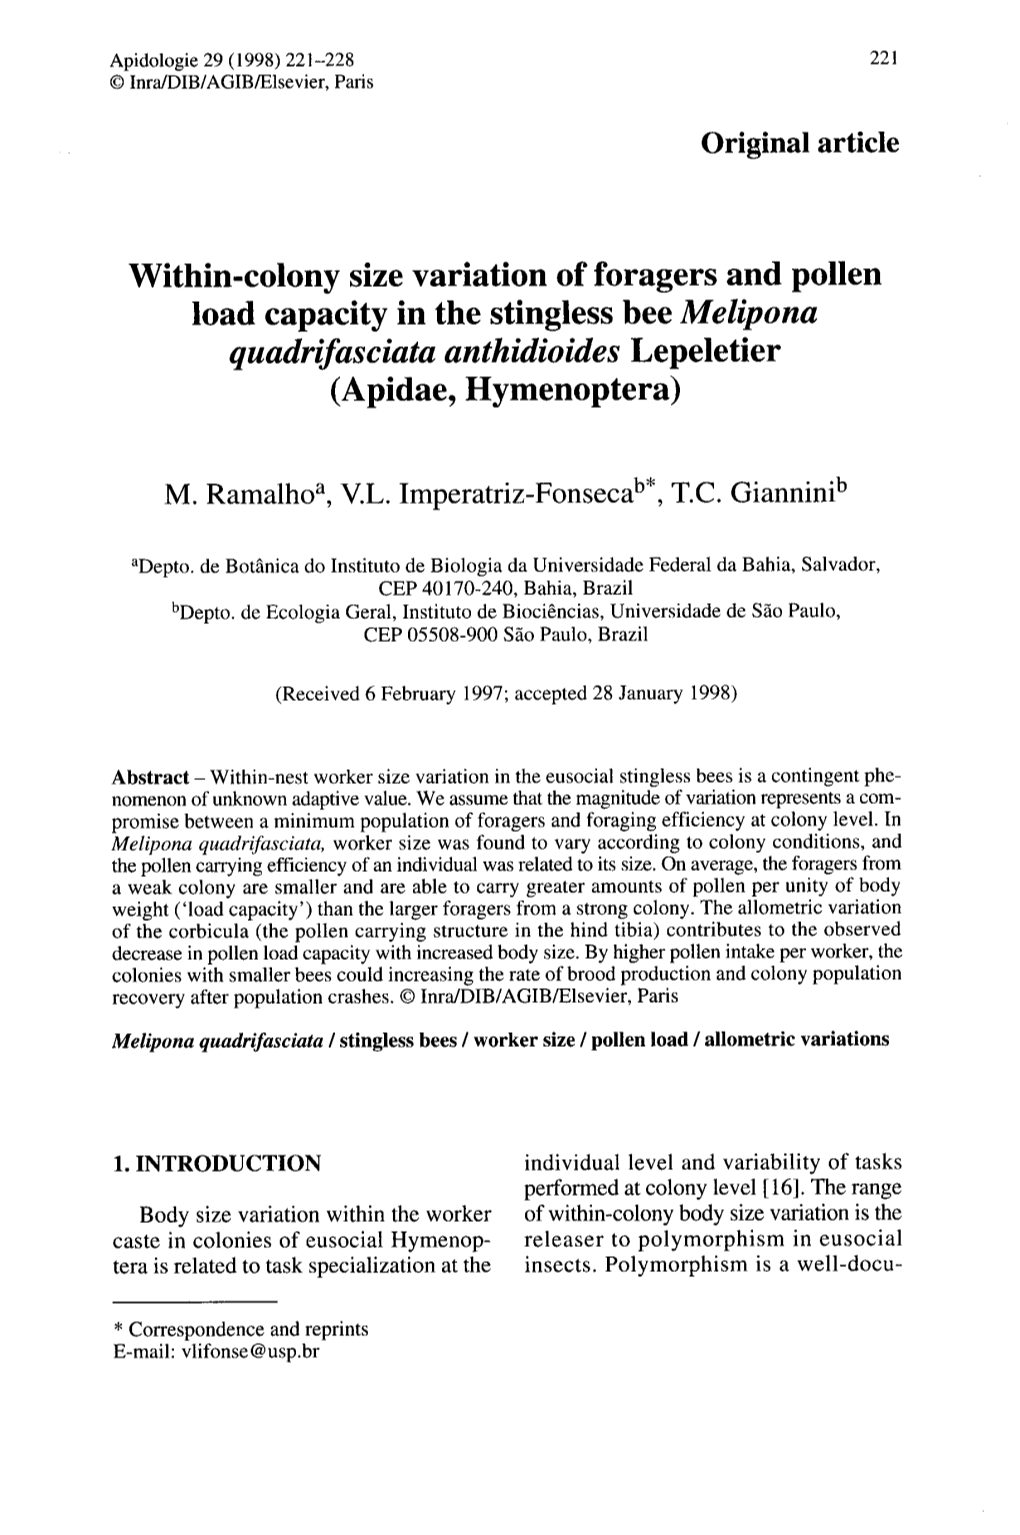 Within-Colony Size Variation of Foragers and Pollen Load Capacity in the Stingless Bee Melipona Quadrifasciata Anthidioides Lepeletier (Apidae, Hymenoptera)